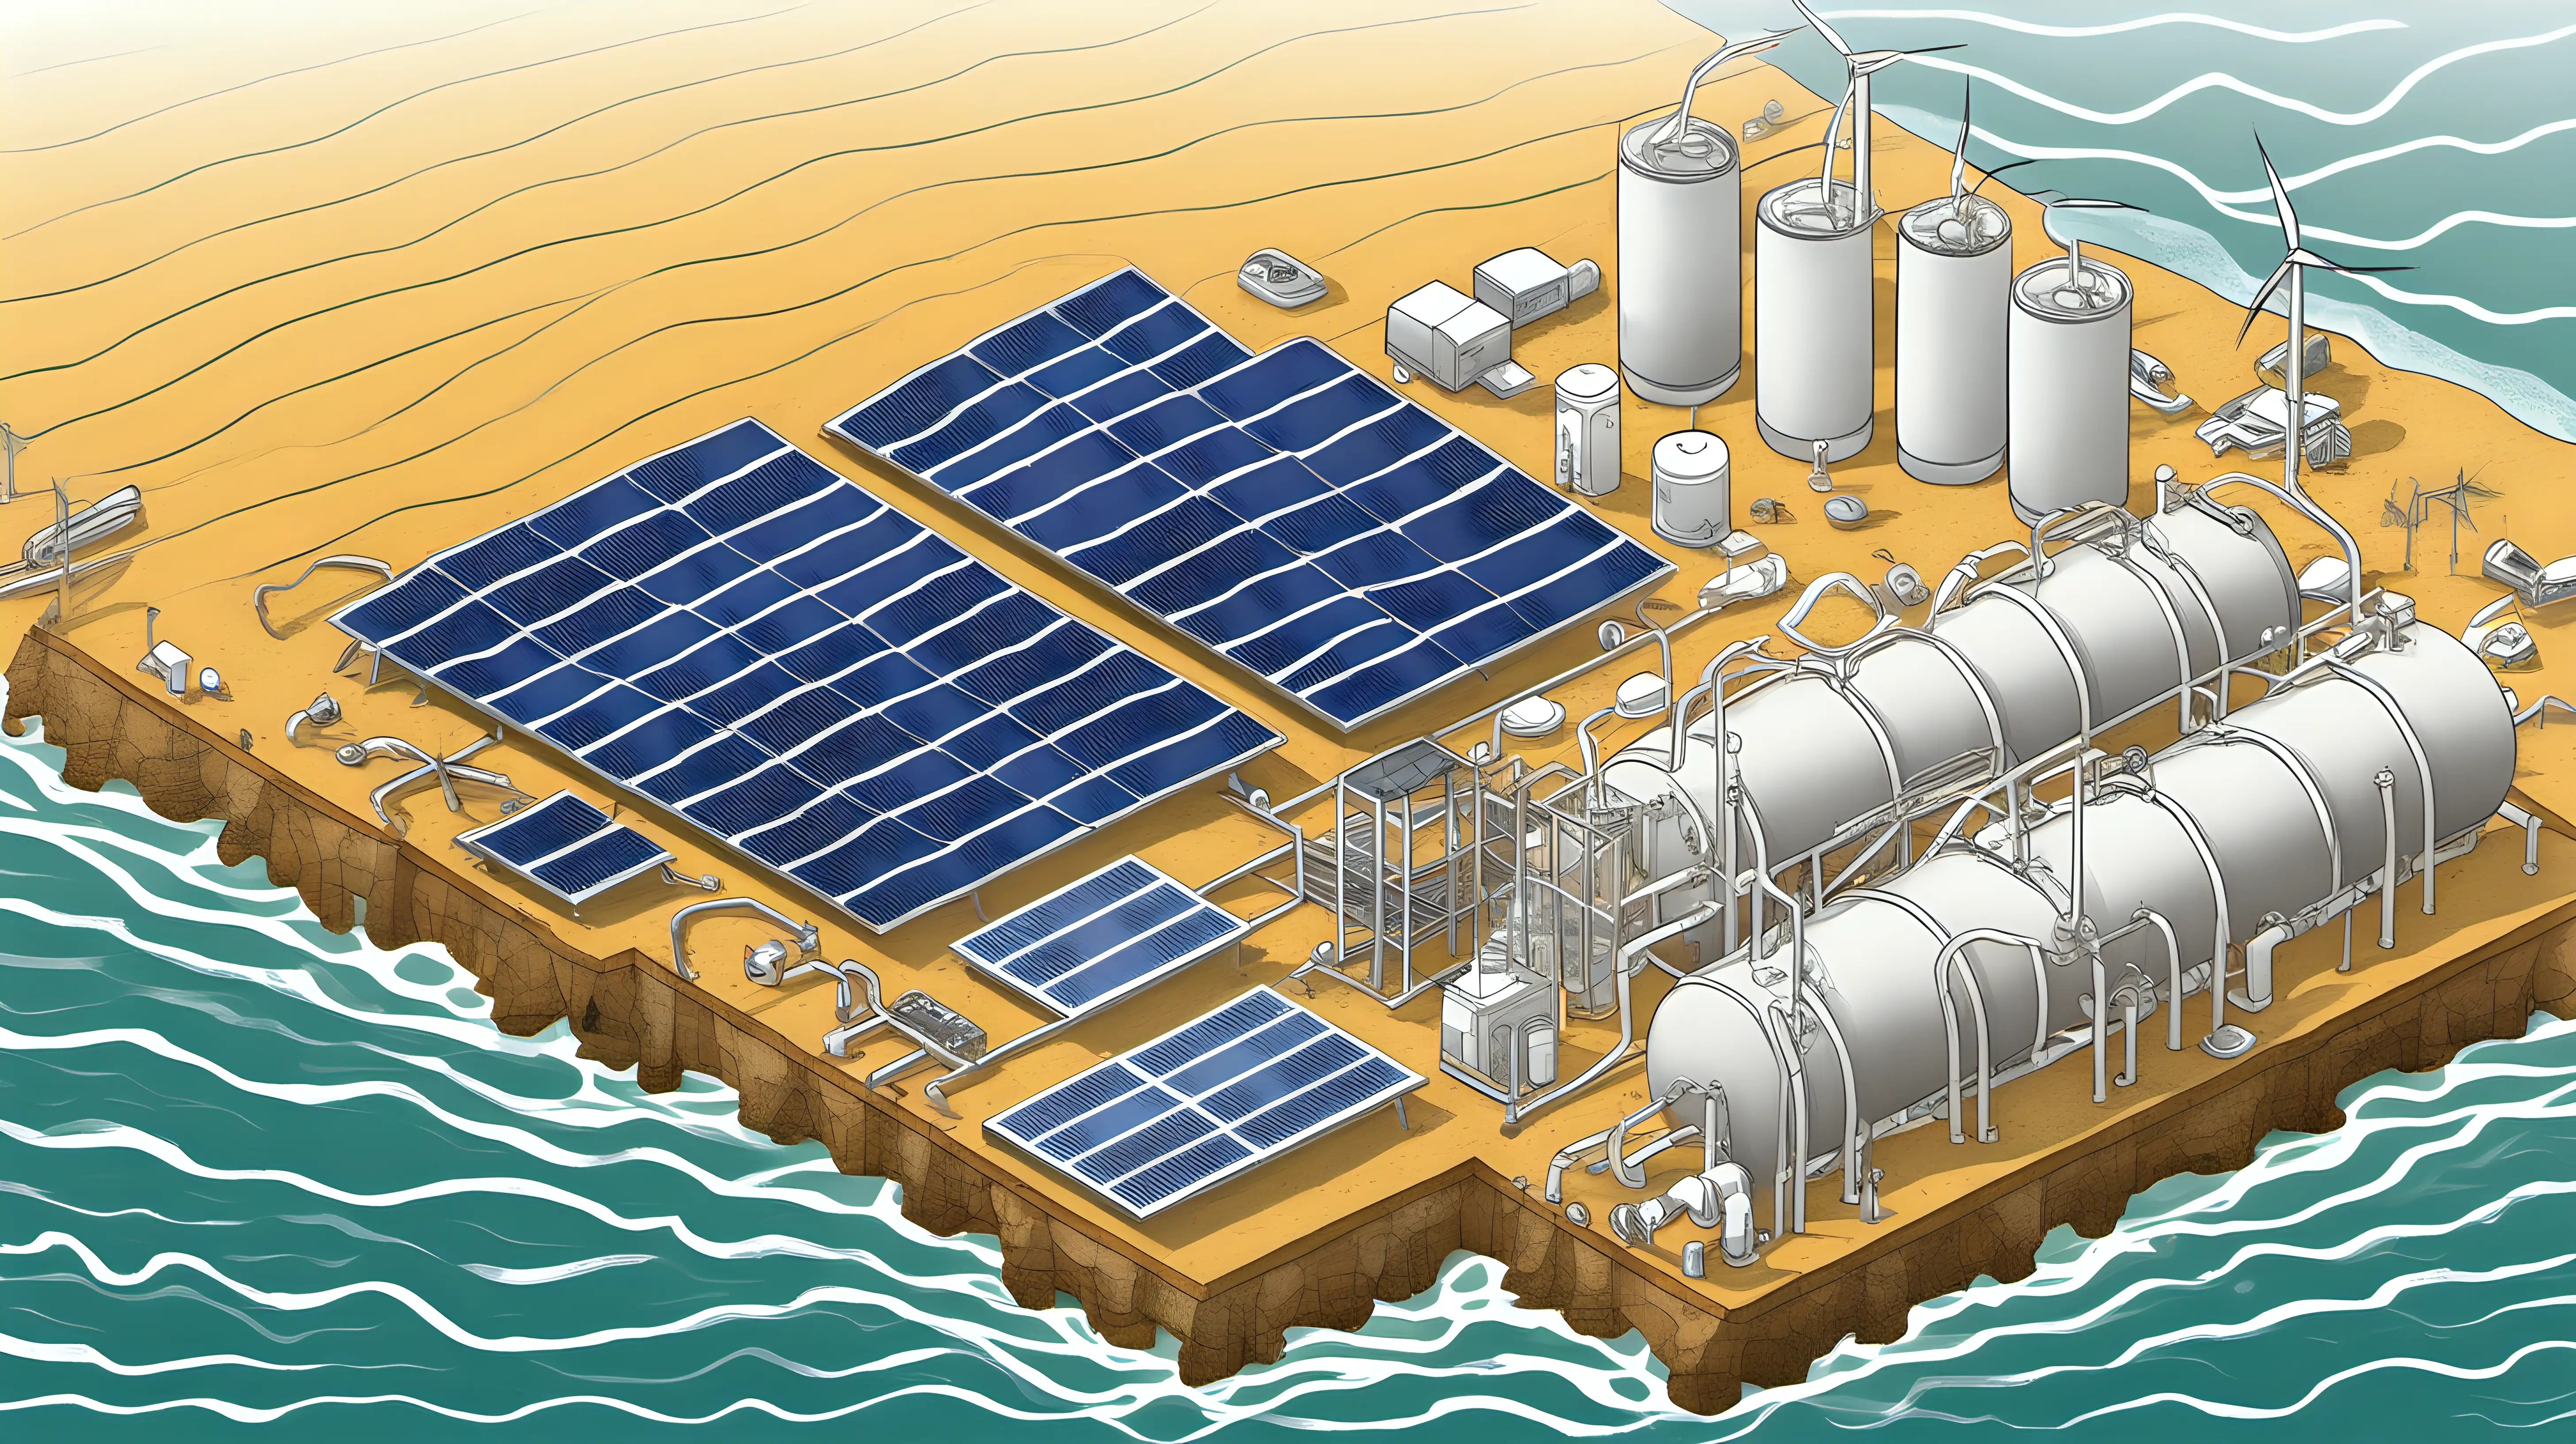 "Craft an illustration of a solar-powered desalination plant addressing both clean energy and water scarcity issues in a coastal region."